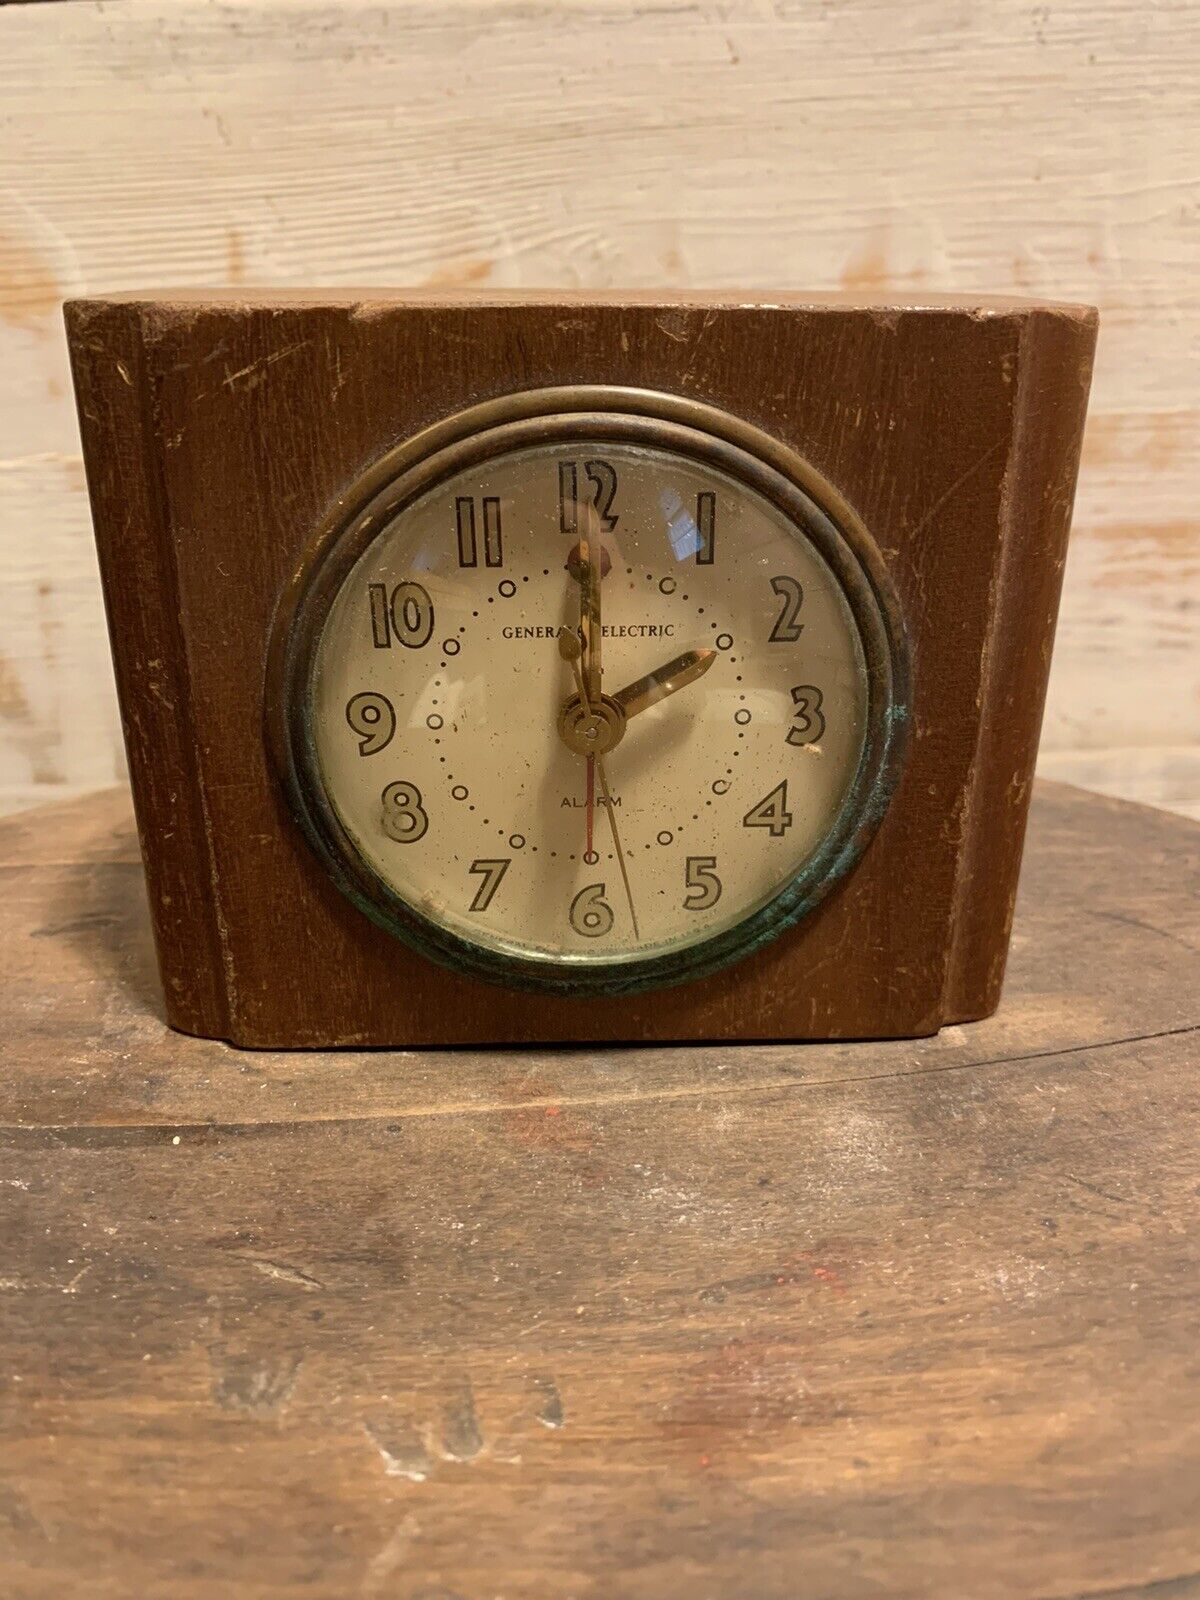 Vintage General Electric Alarm Clock Wooden Case Non Working Deco Style 50s/60s?